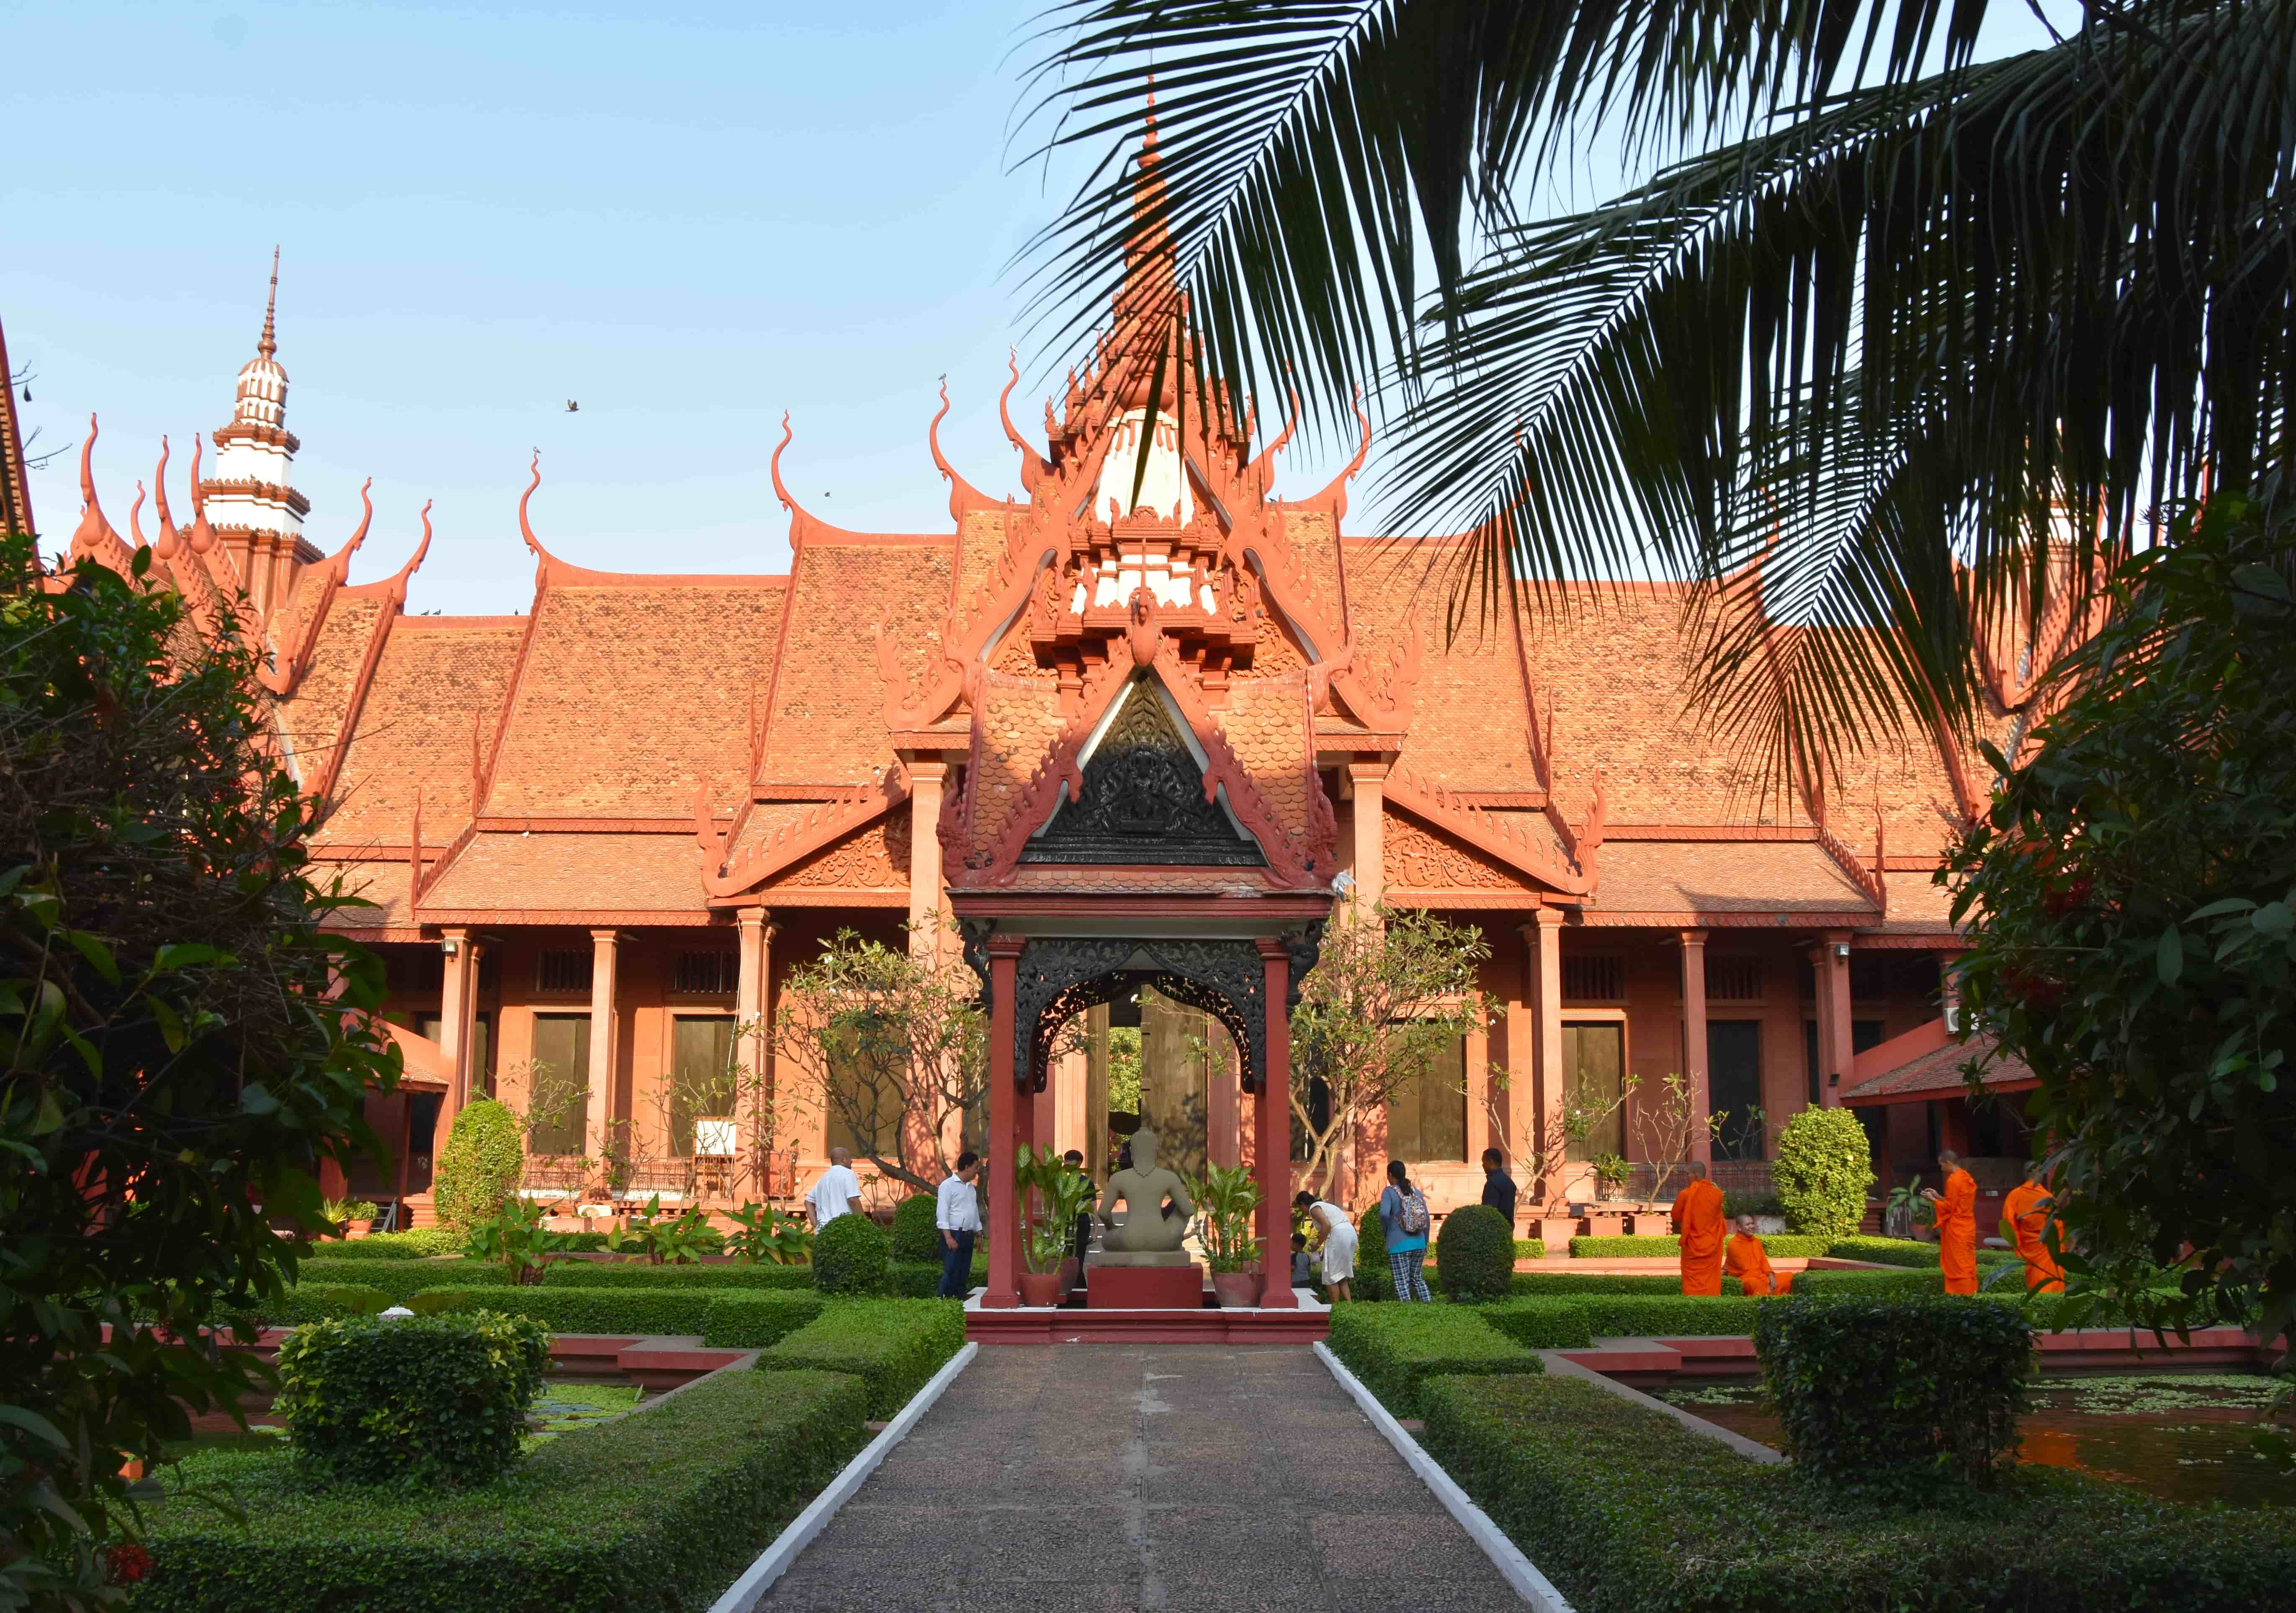 The National Museum of Cambodia in Phnom Penh, showcasing Cambodia’s rich history.